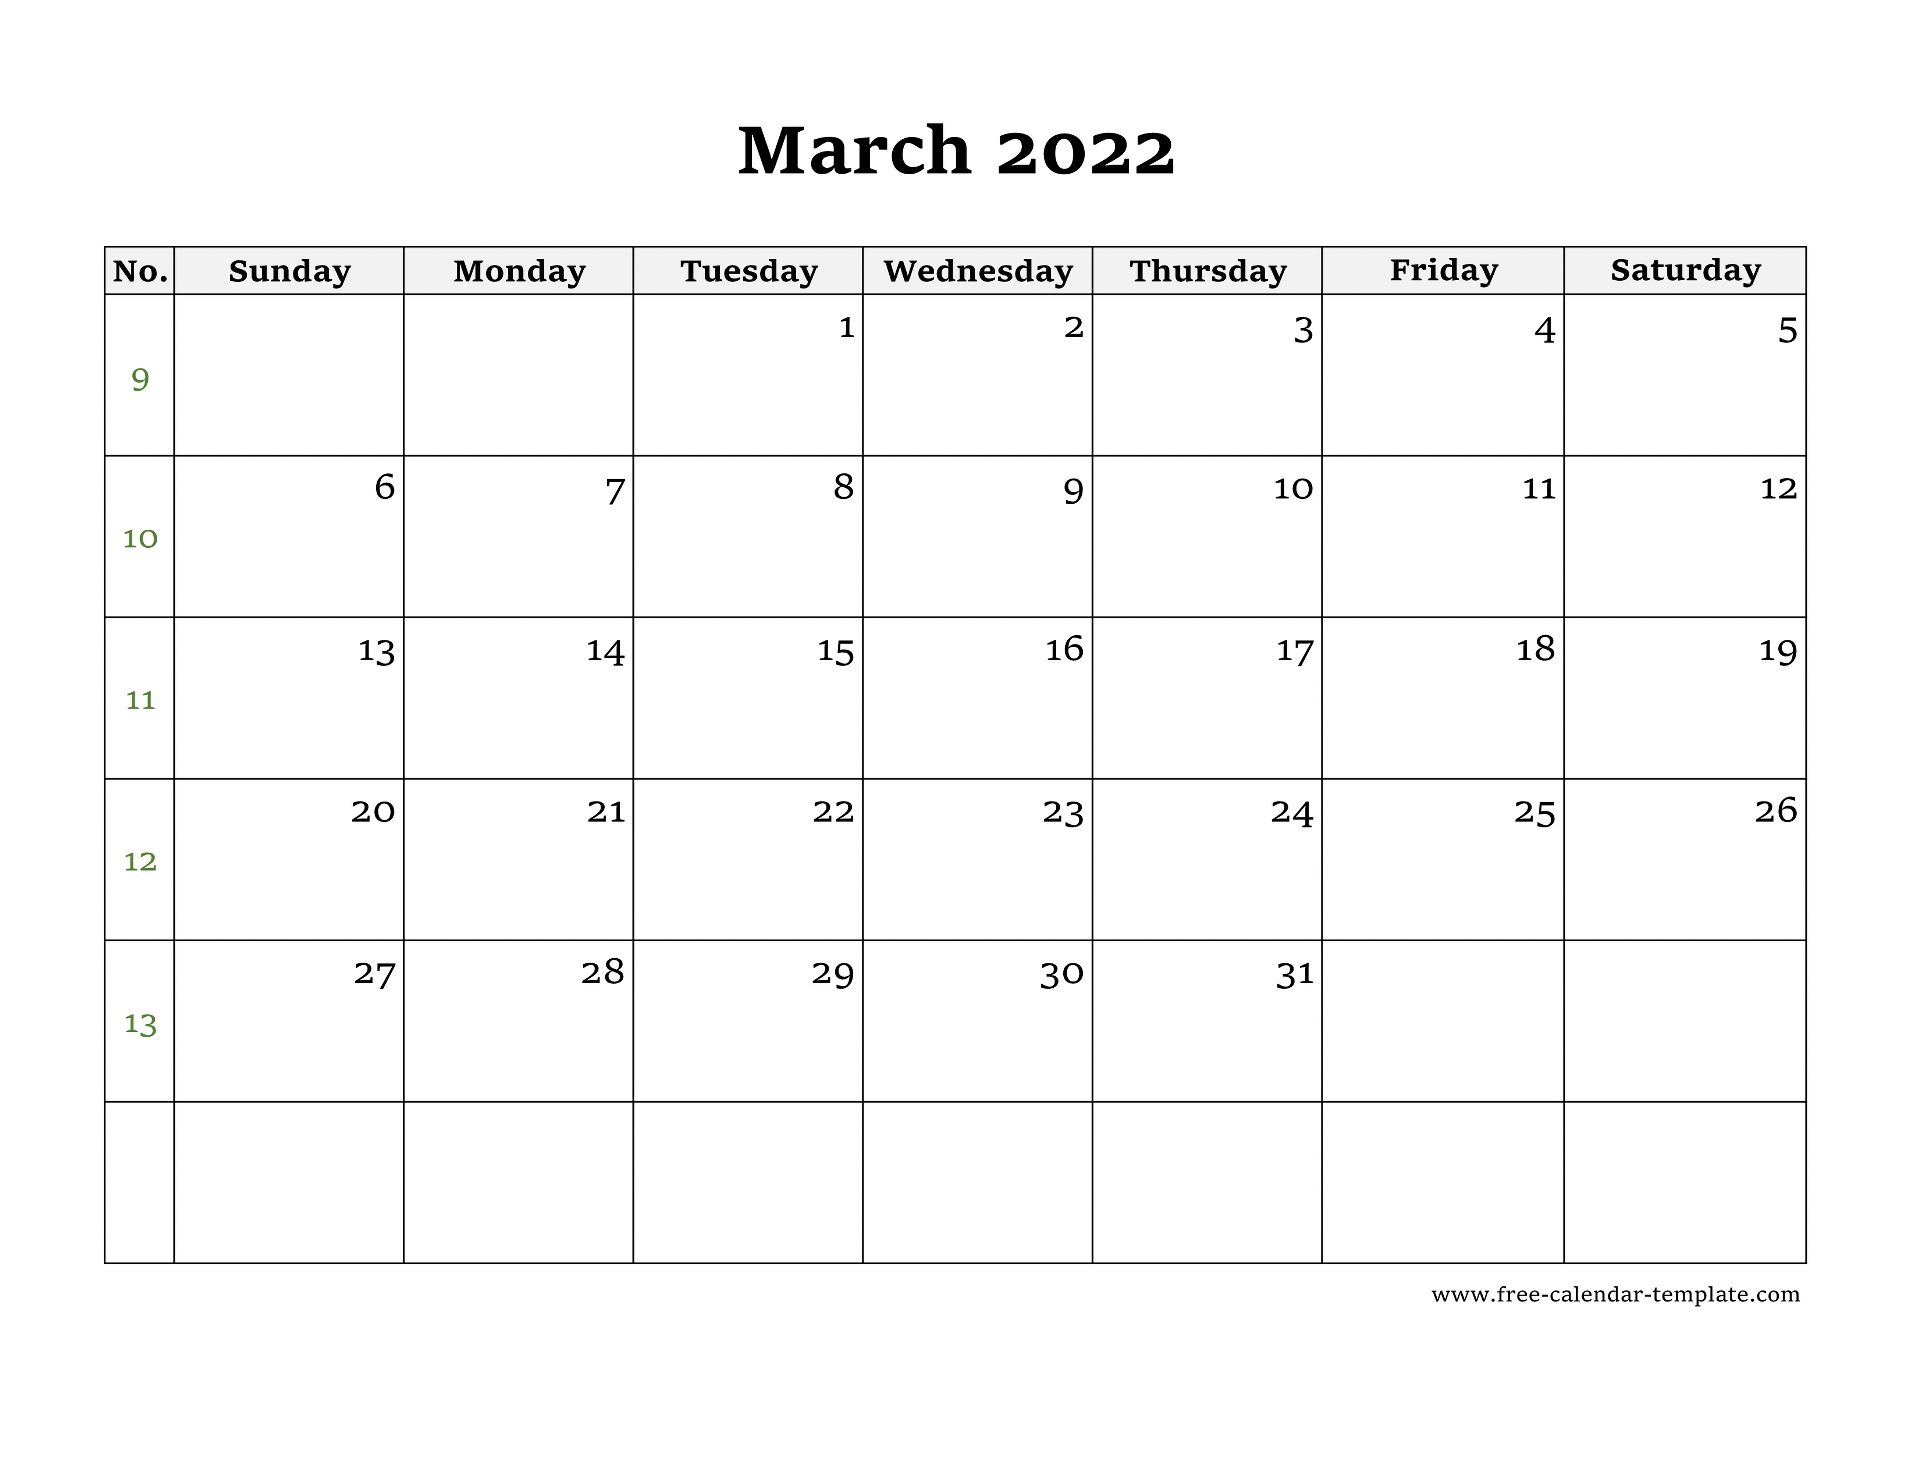 March 2022 Calendar Printable With Holidays